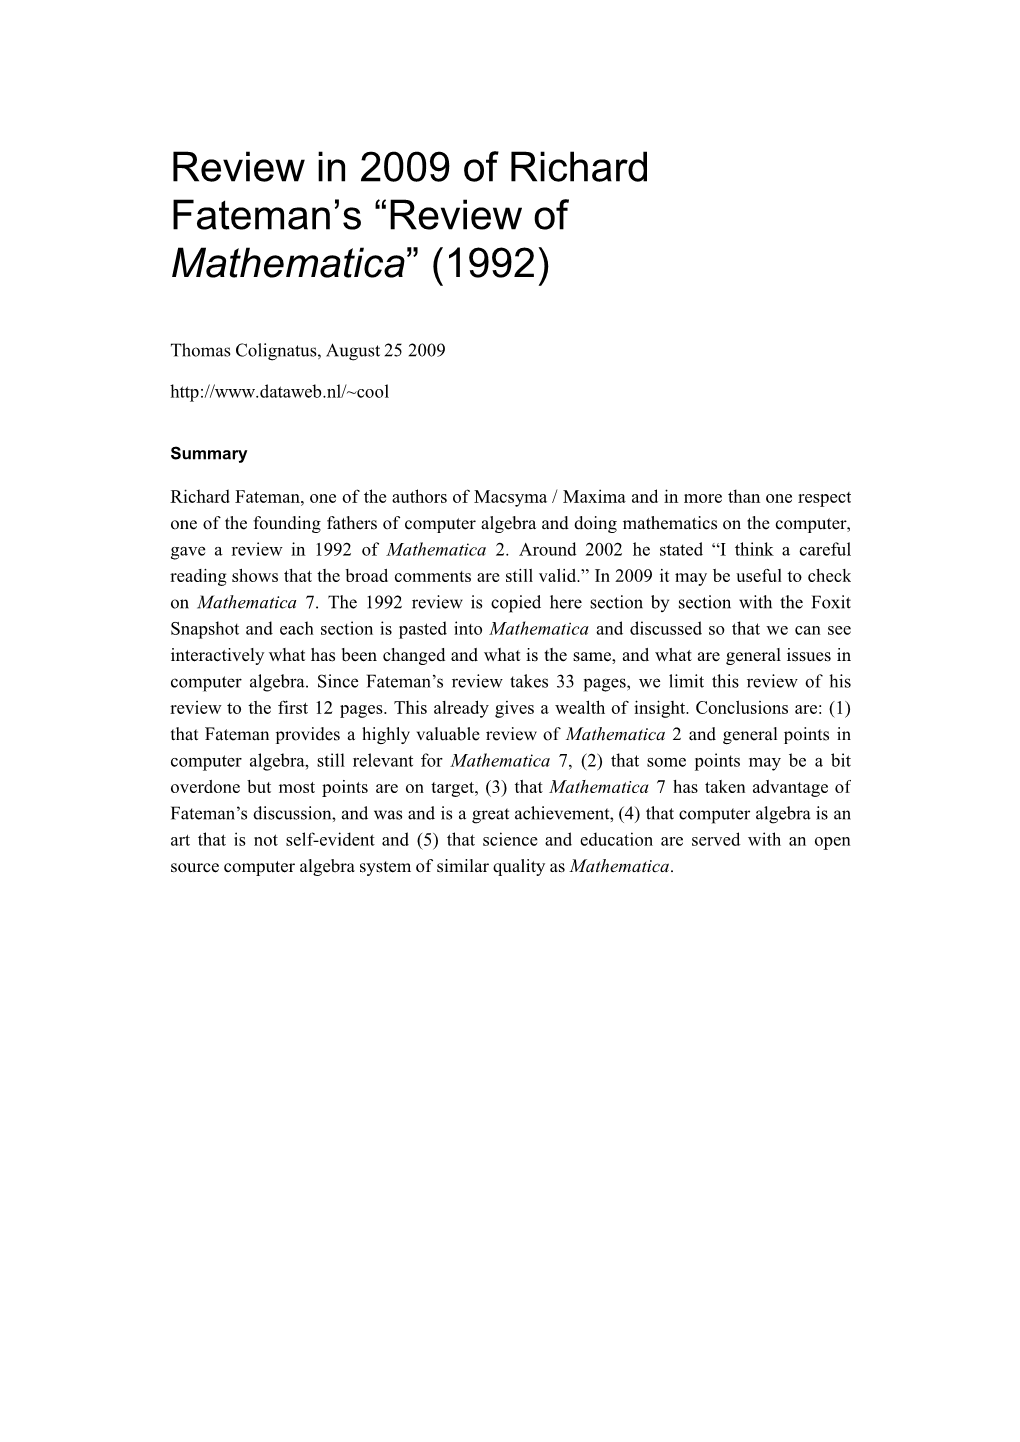 Review in 2009 of Richard Fateman's “Review of Mathematica” (1992)